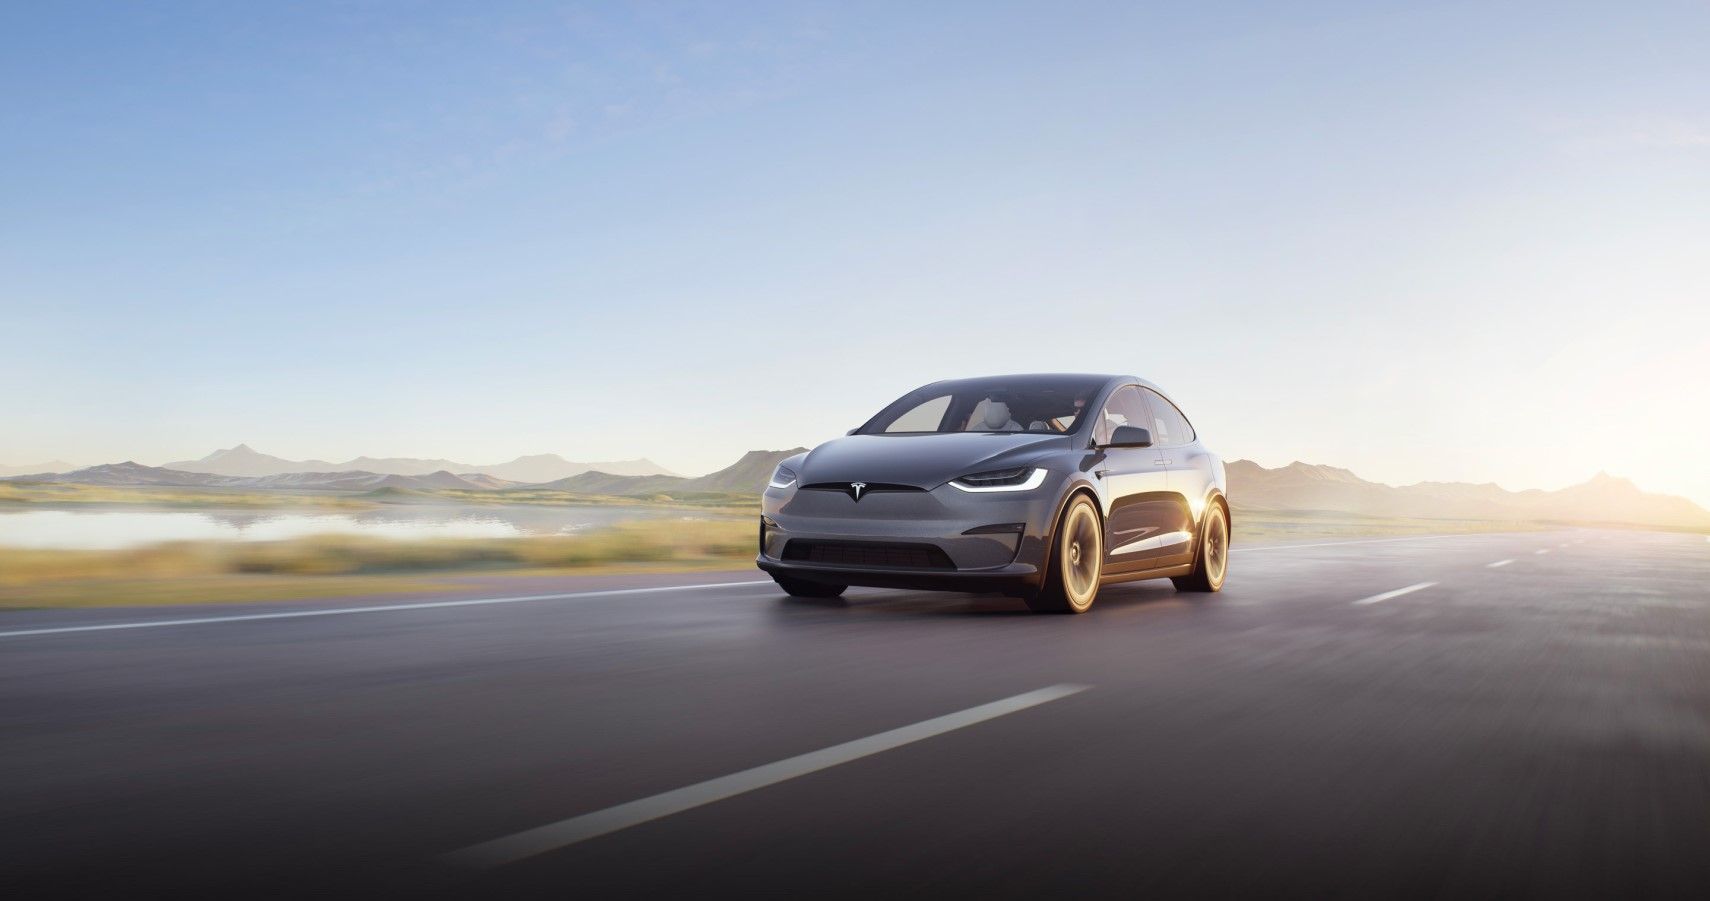 2022 Tesla Model X Plaid front third quarter view on the highway